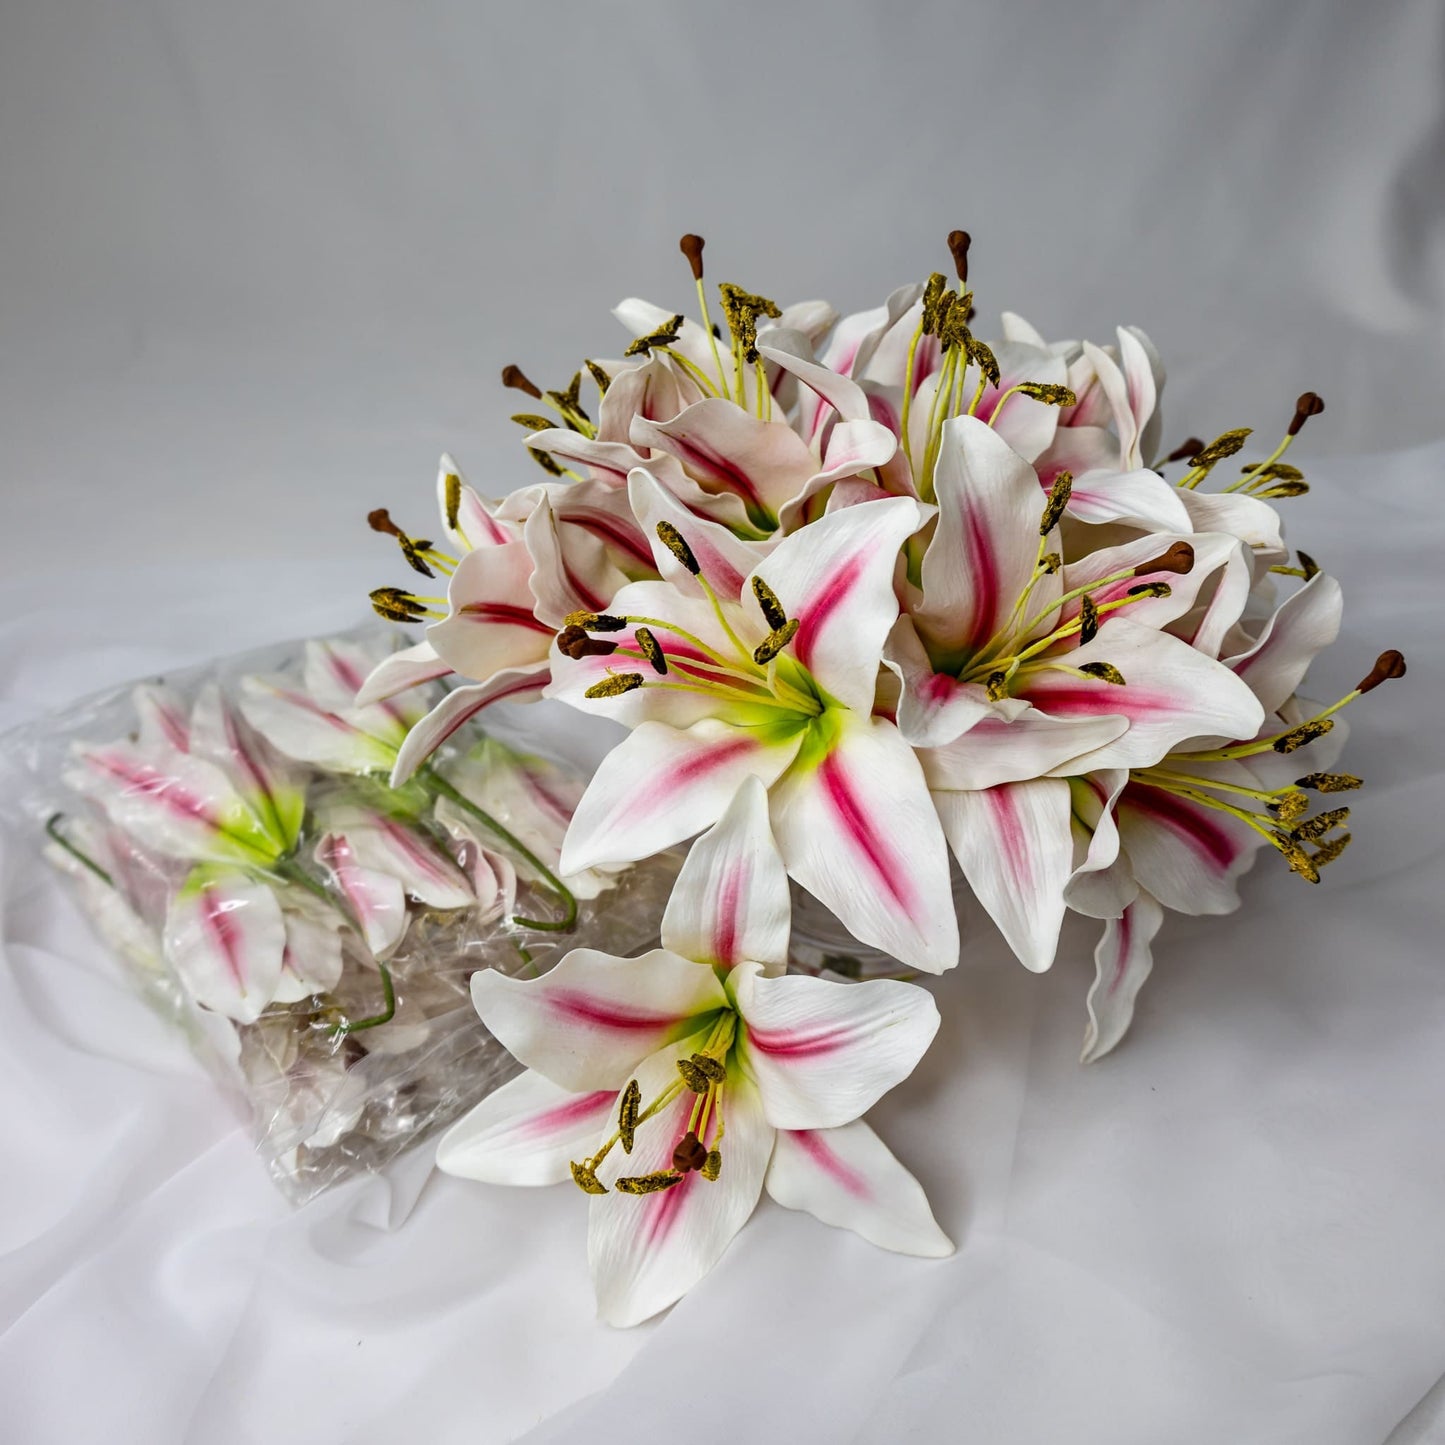 artificial White/Pink Stripe Asiatic Lily Flowerhead in glass vase